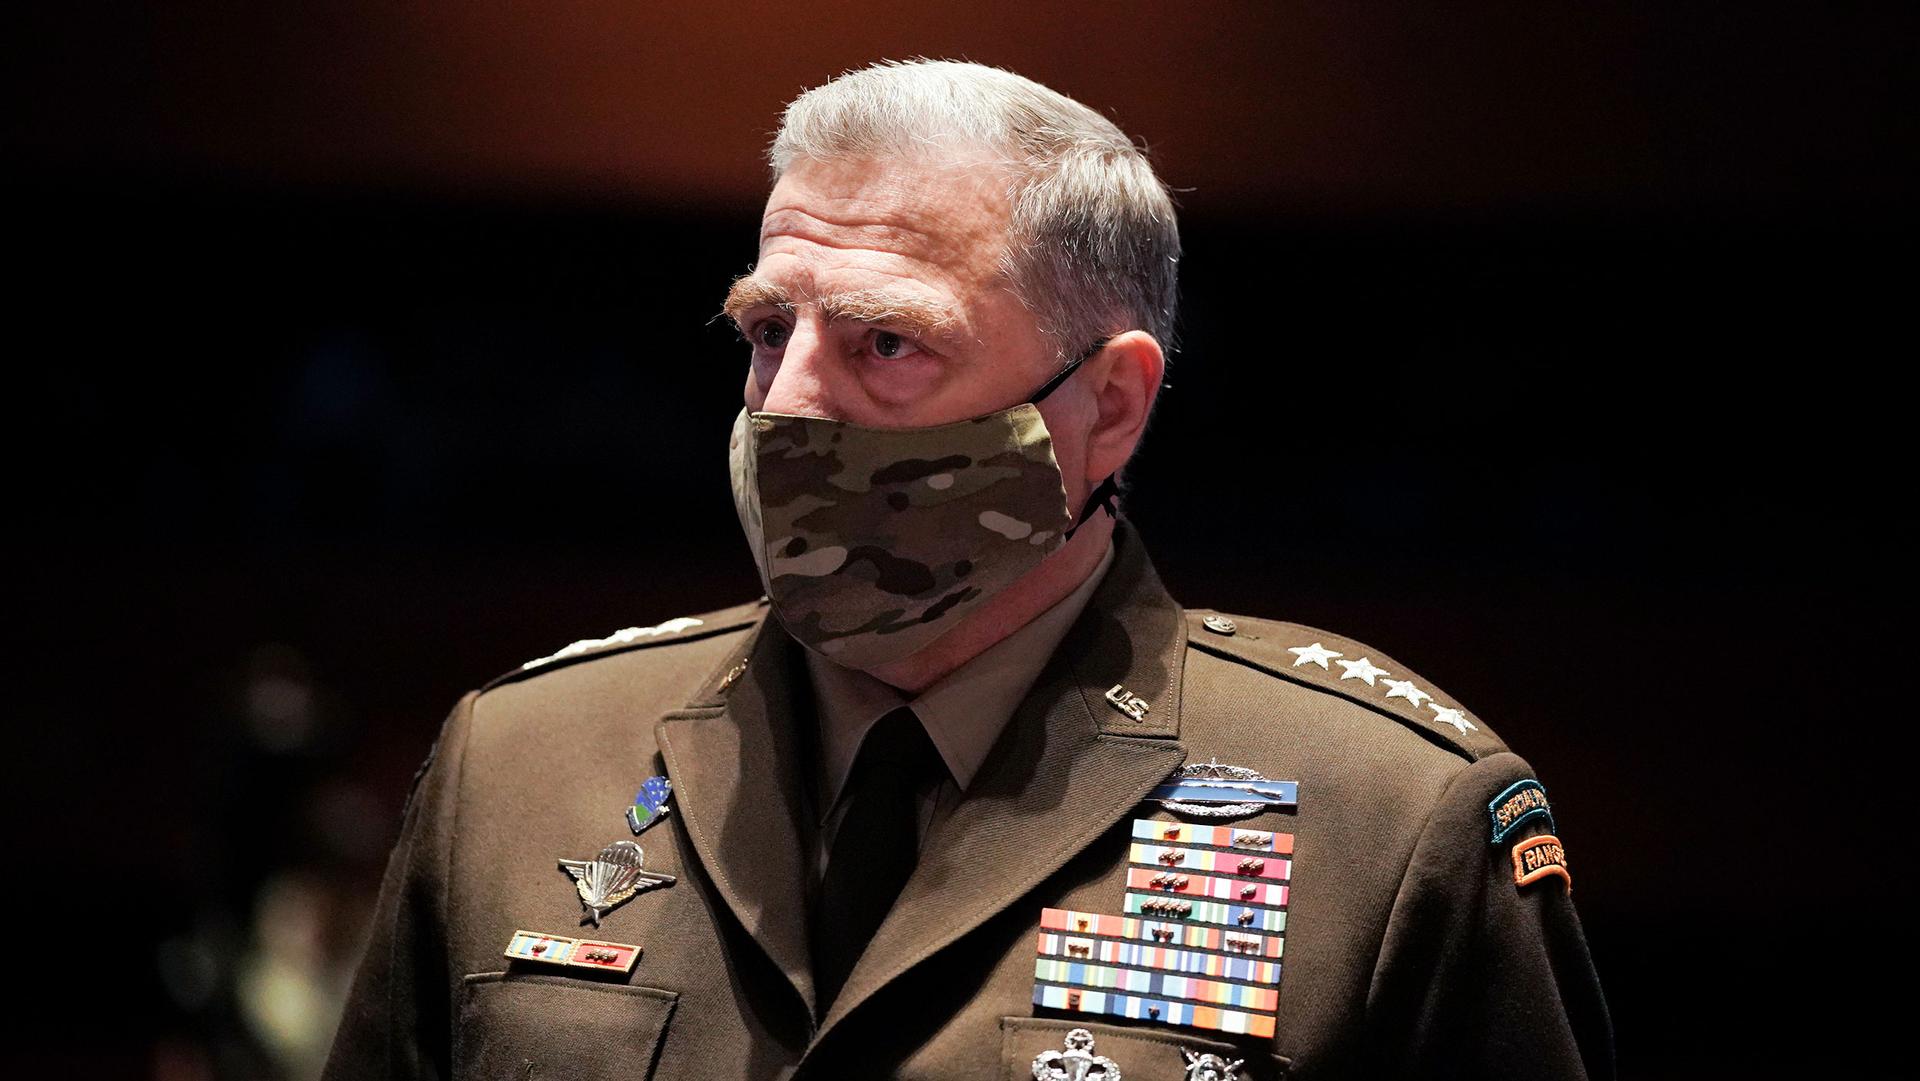 Chairman of the Joint Chiefs of Staff Gen. Mark Milley is shown wearing a camoflaged face mask and his military suit with medals across his chest.